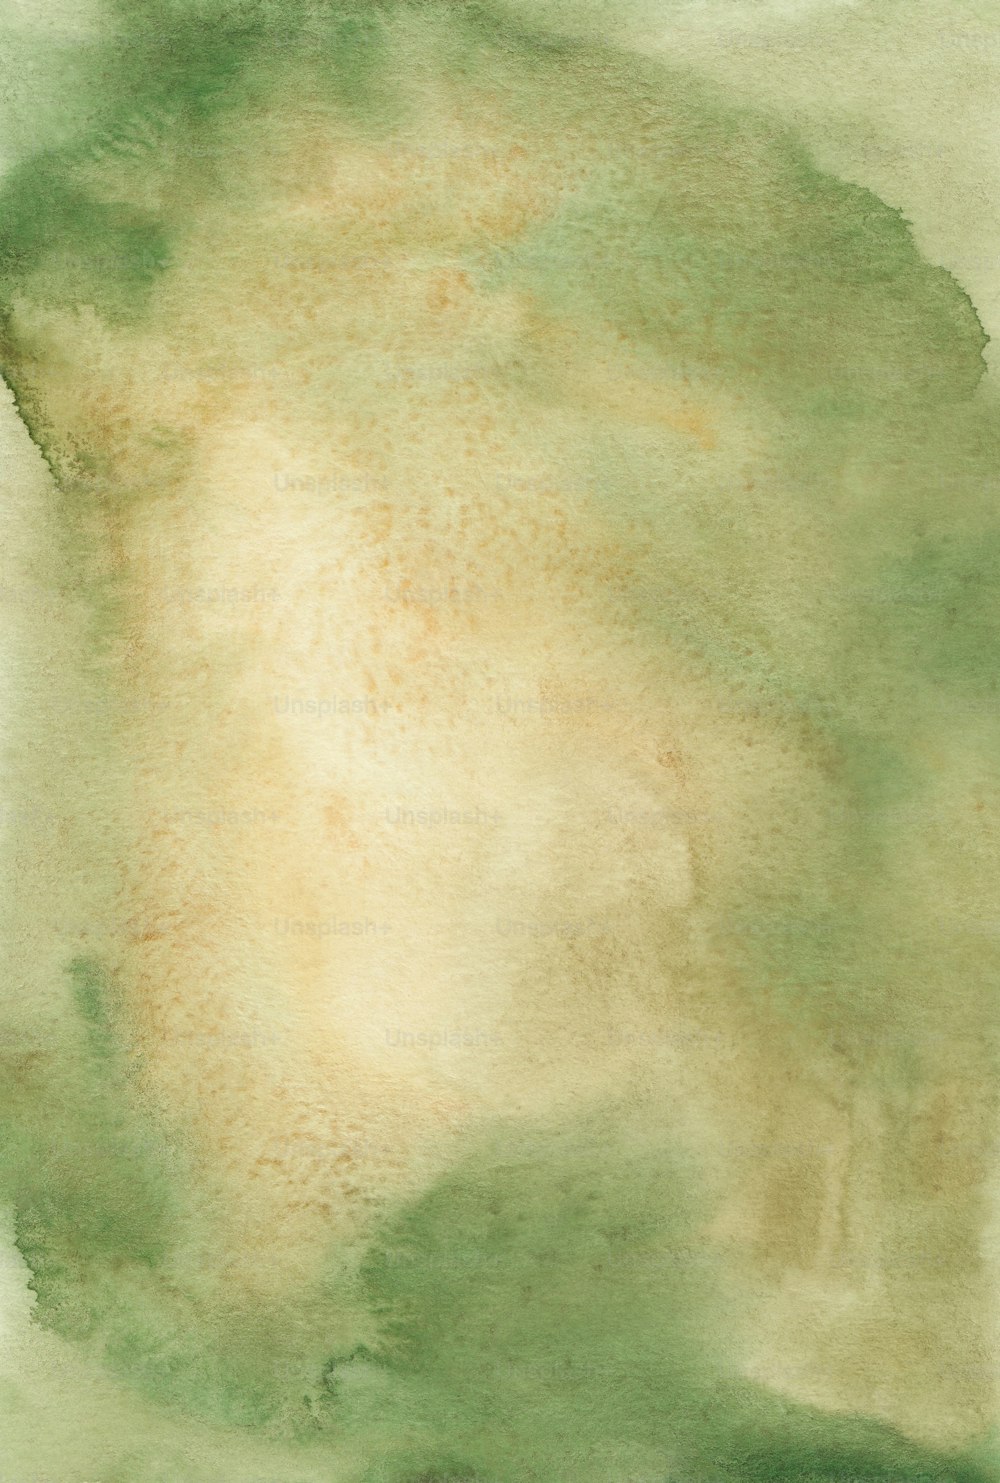 a painting of a green and white background